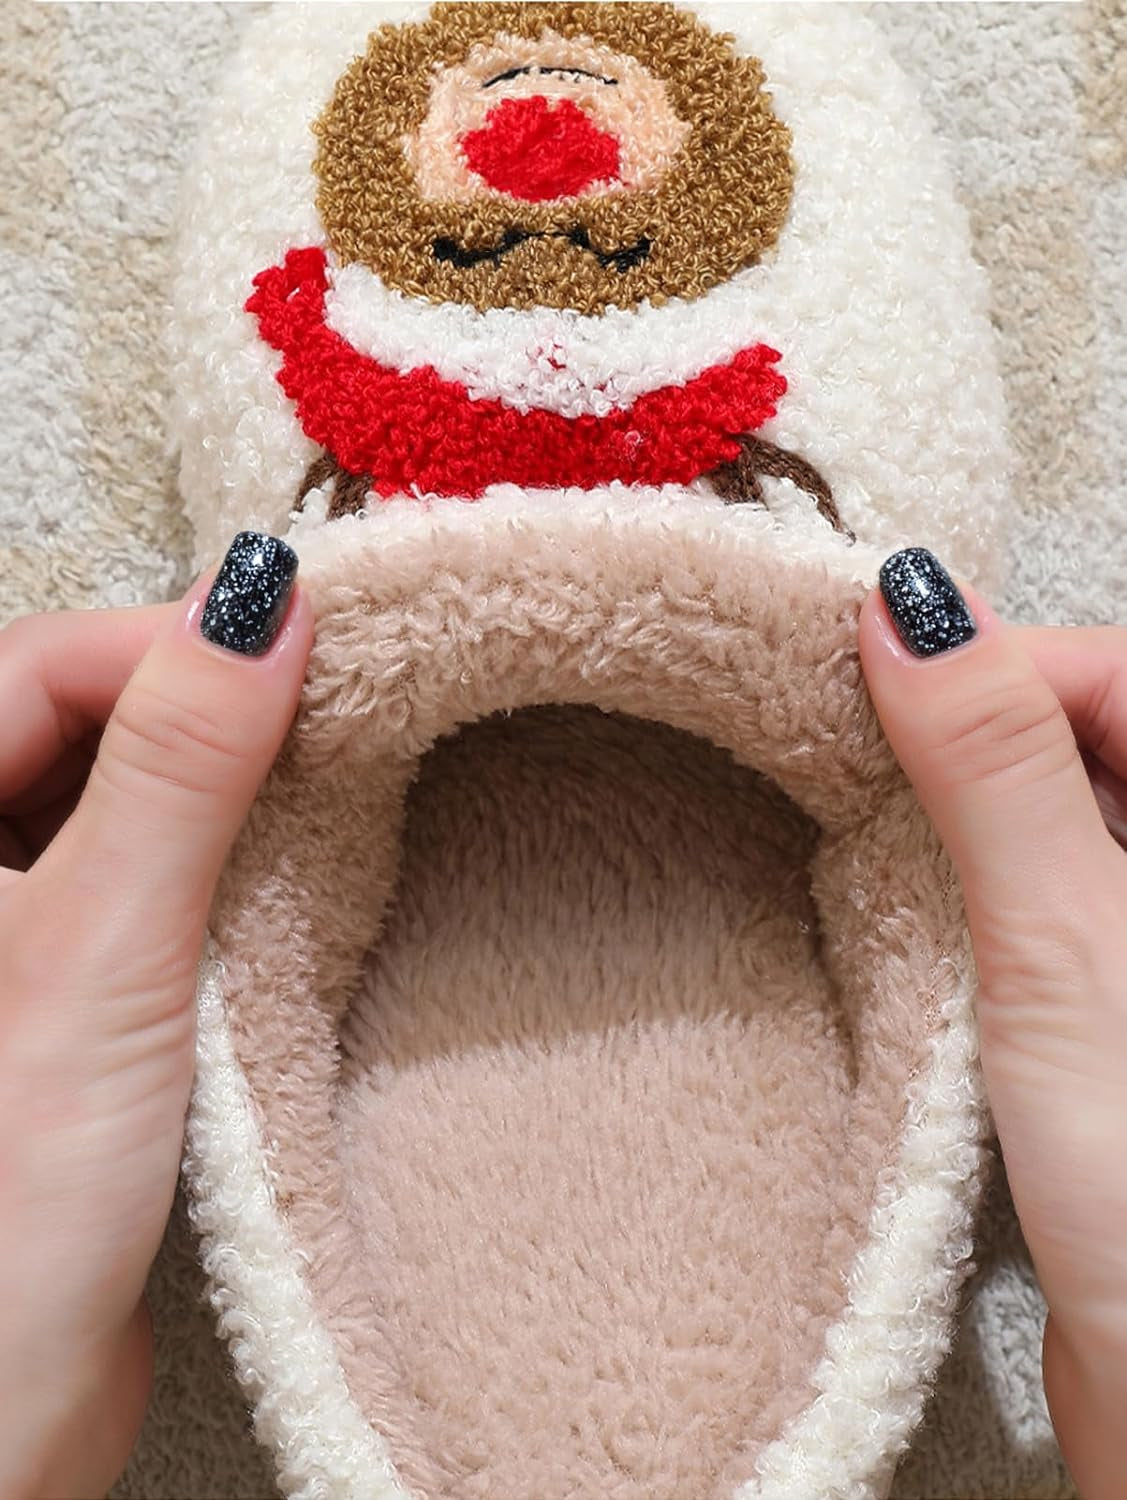 Christmas Slippers Reindeer Slippers for Women and Men Elk Animal Holiday Slipper Cute Xmas Moose Slippers Indoor Bedroom Fluffy Cartoon Warm Fleece Slippers Winter Soft Cozy Home Non-Slip Soft Plush Slip-On Wool Lined House Shoes